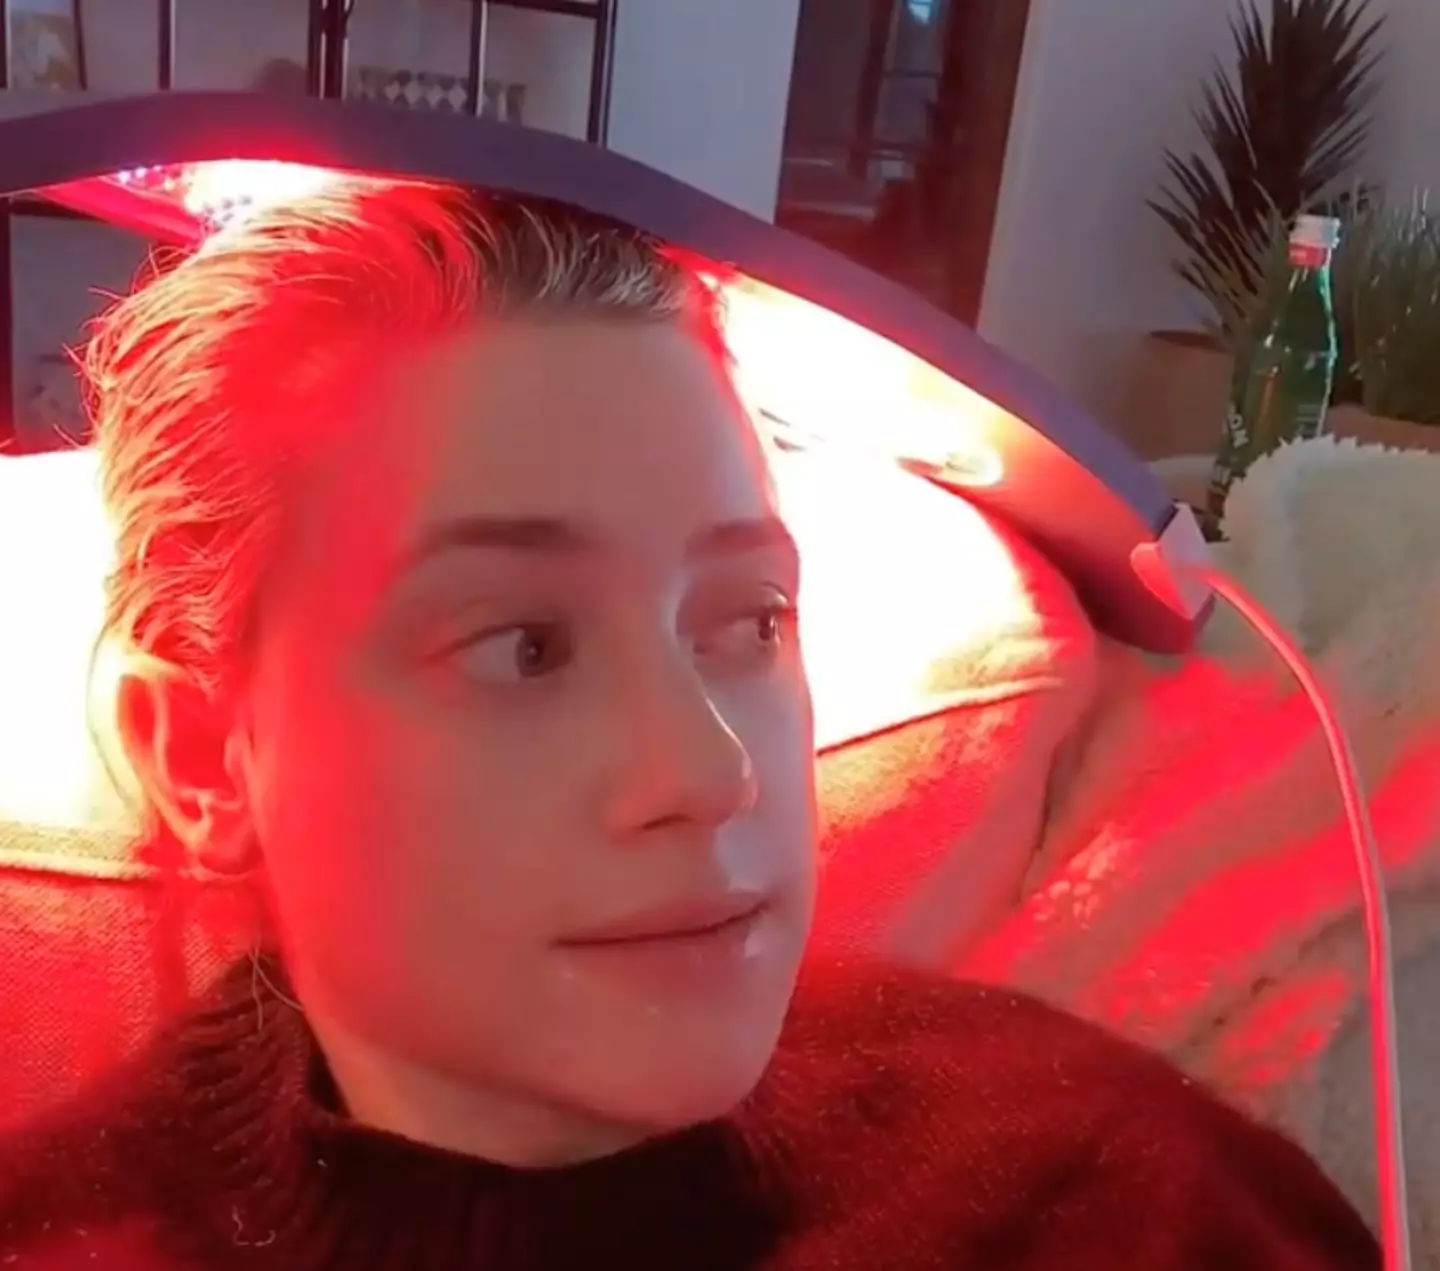 Lili Reinhart has been undergoing treatment for her alopecia.